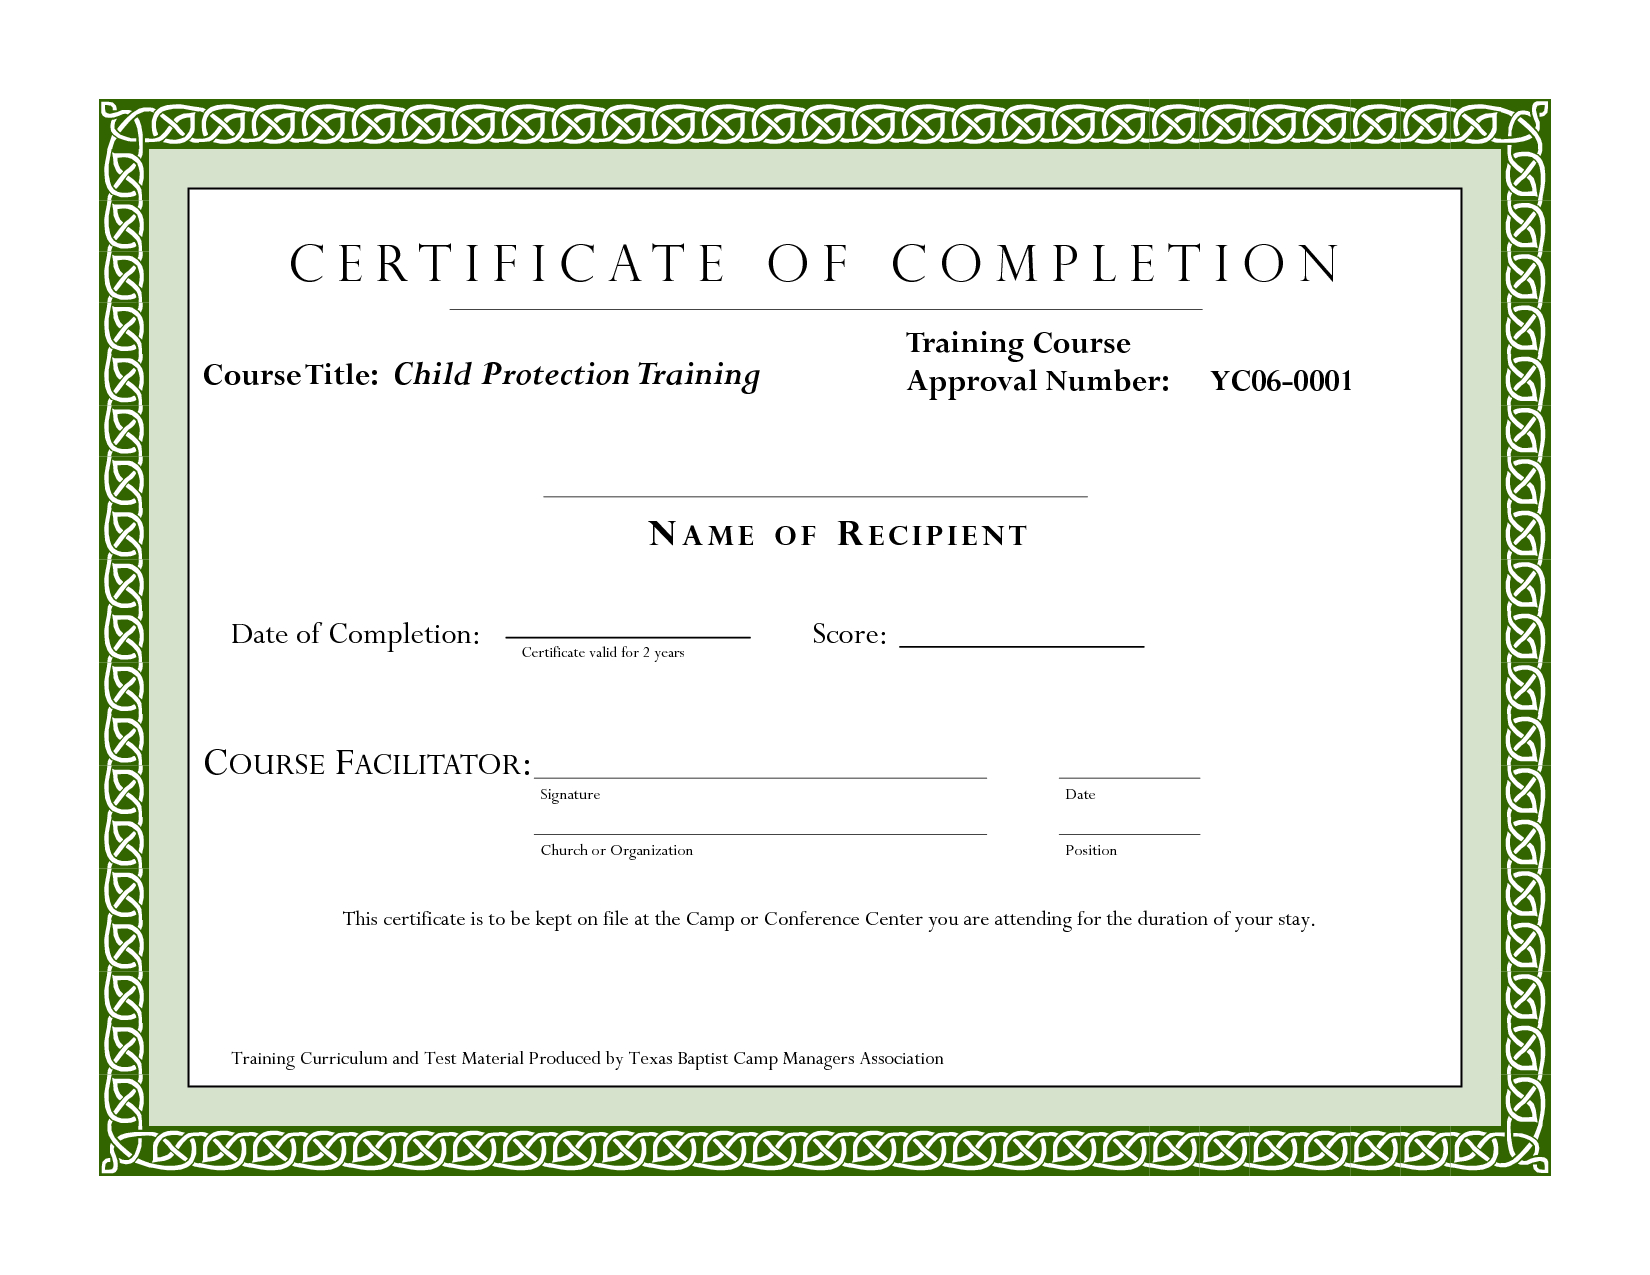 Course Completion Certificate Template | Certificate Of Inside Certificate Template For Project Completion